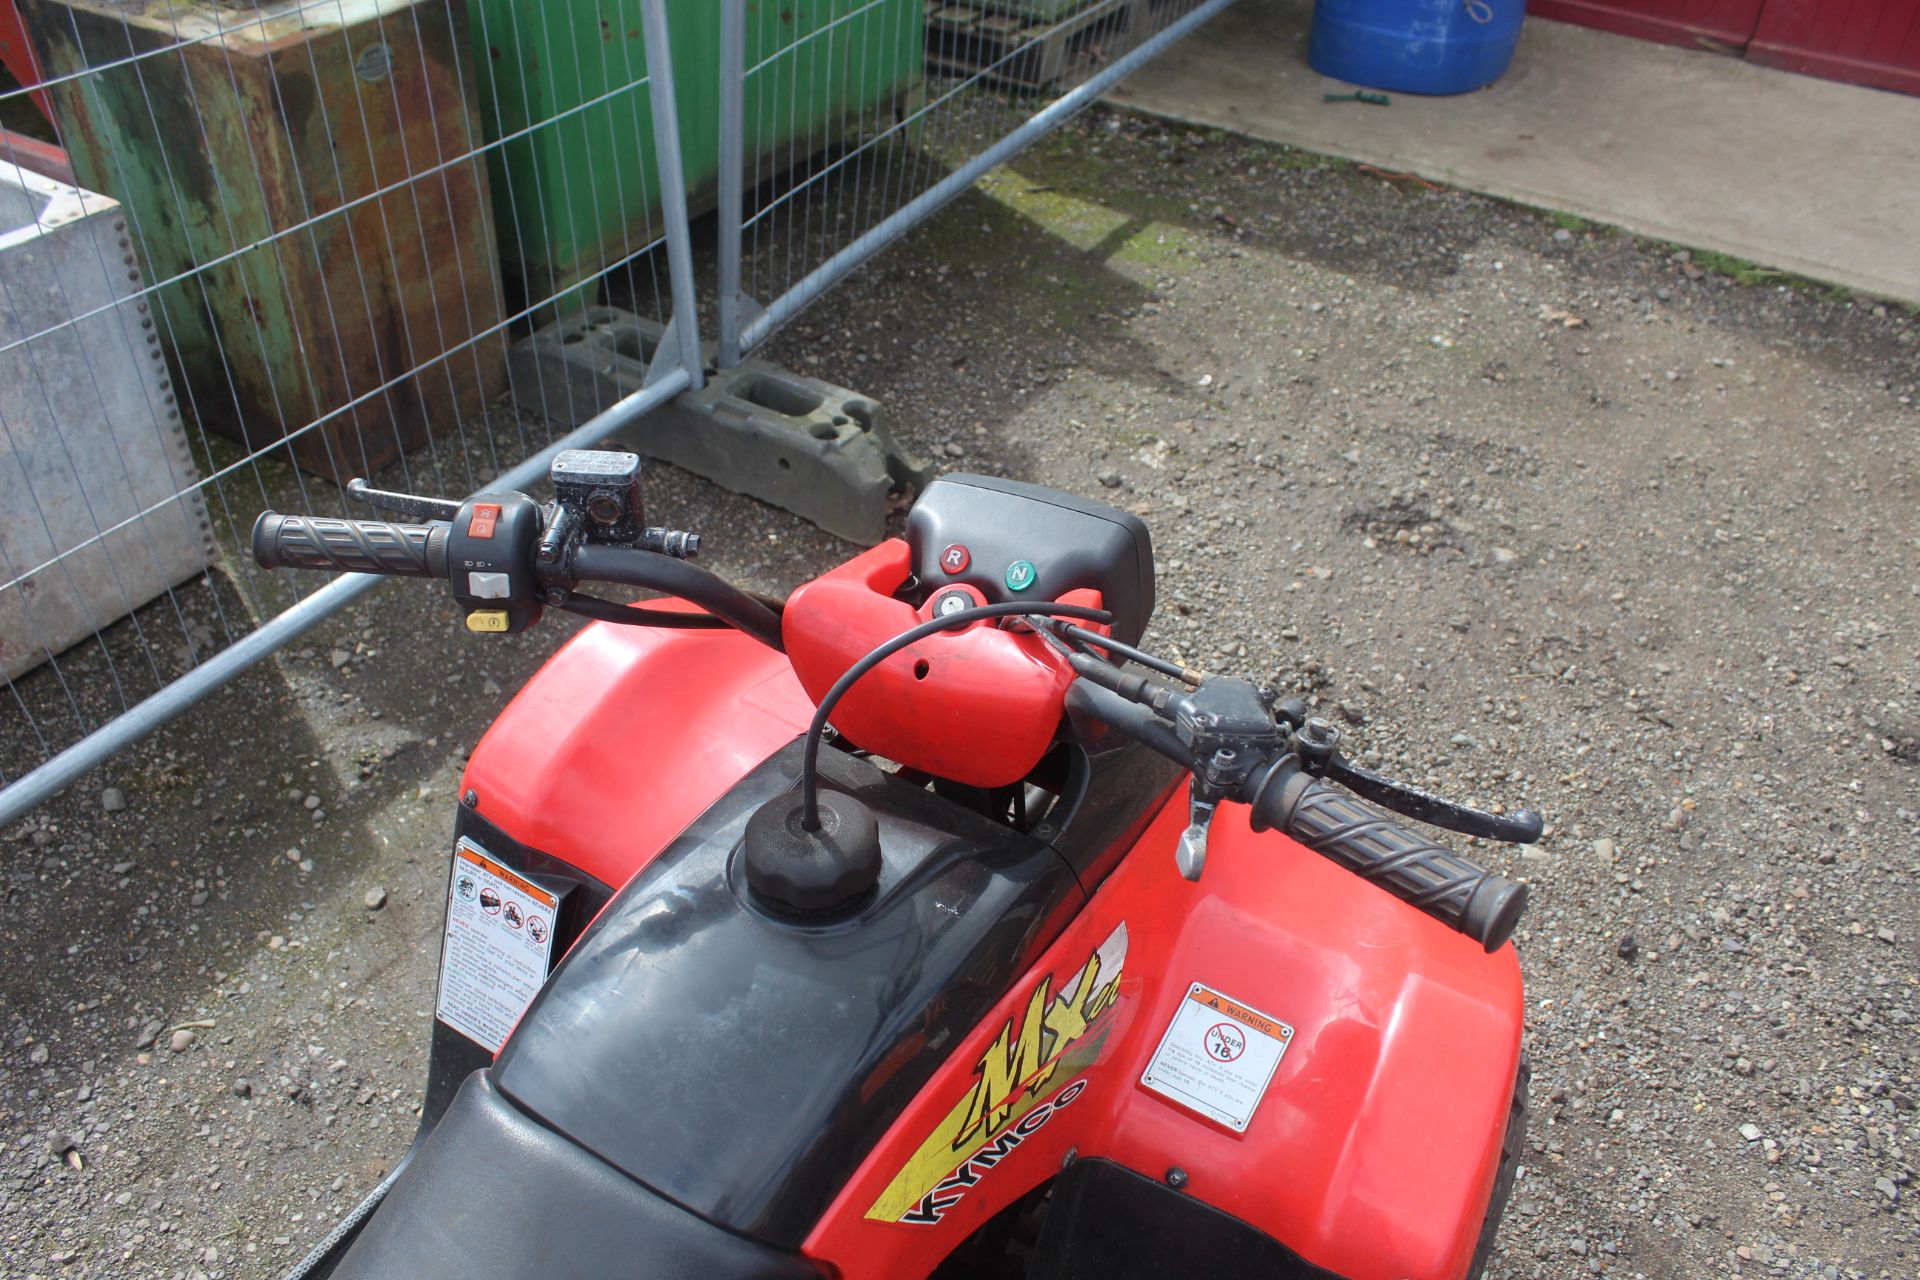 Kymco MX'er 150cc off road ATV. 2004. owned from new. Key, Manual held. - Image 5 of 18